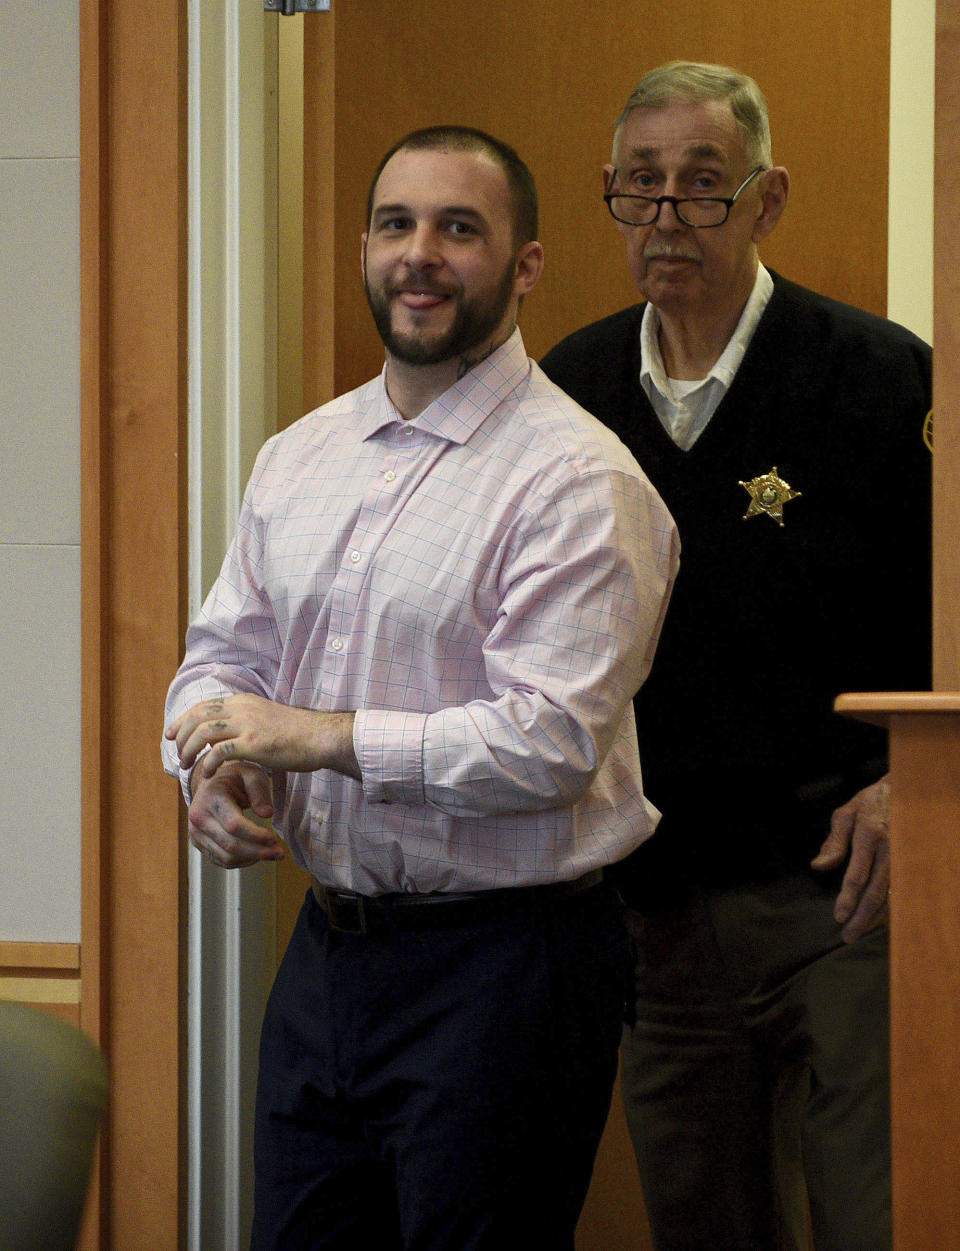 Adam Montgomery enters the courtroom for jury selection ahead of his murder trial at Hillsborough County Superior Court in Manchester, N.H, on Tuesday, Feb. 6, 2024. Montgomery is accused of killing his 5-year-old daughter and spending months moving her body before disposing of it. (David Lane/Union Leader via AP, Pool)